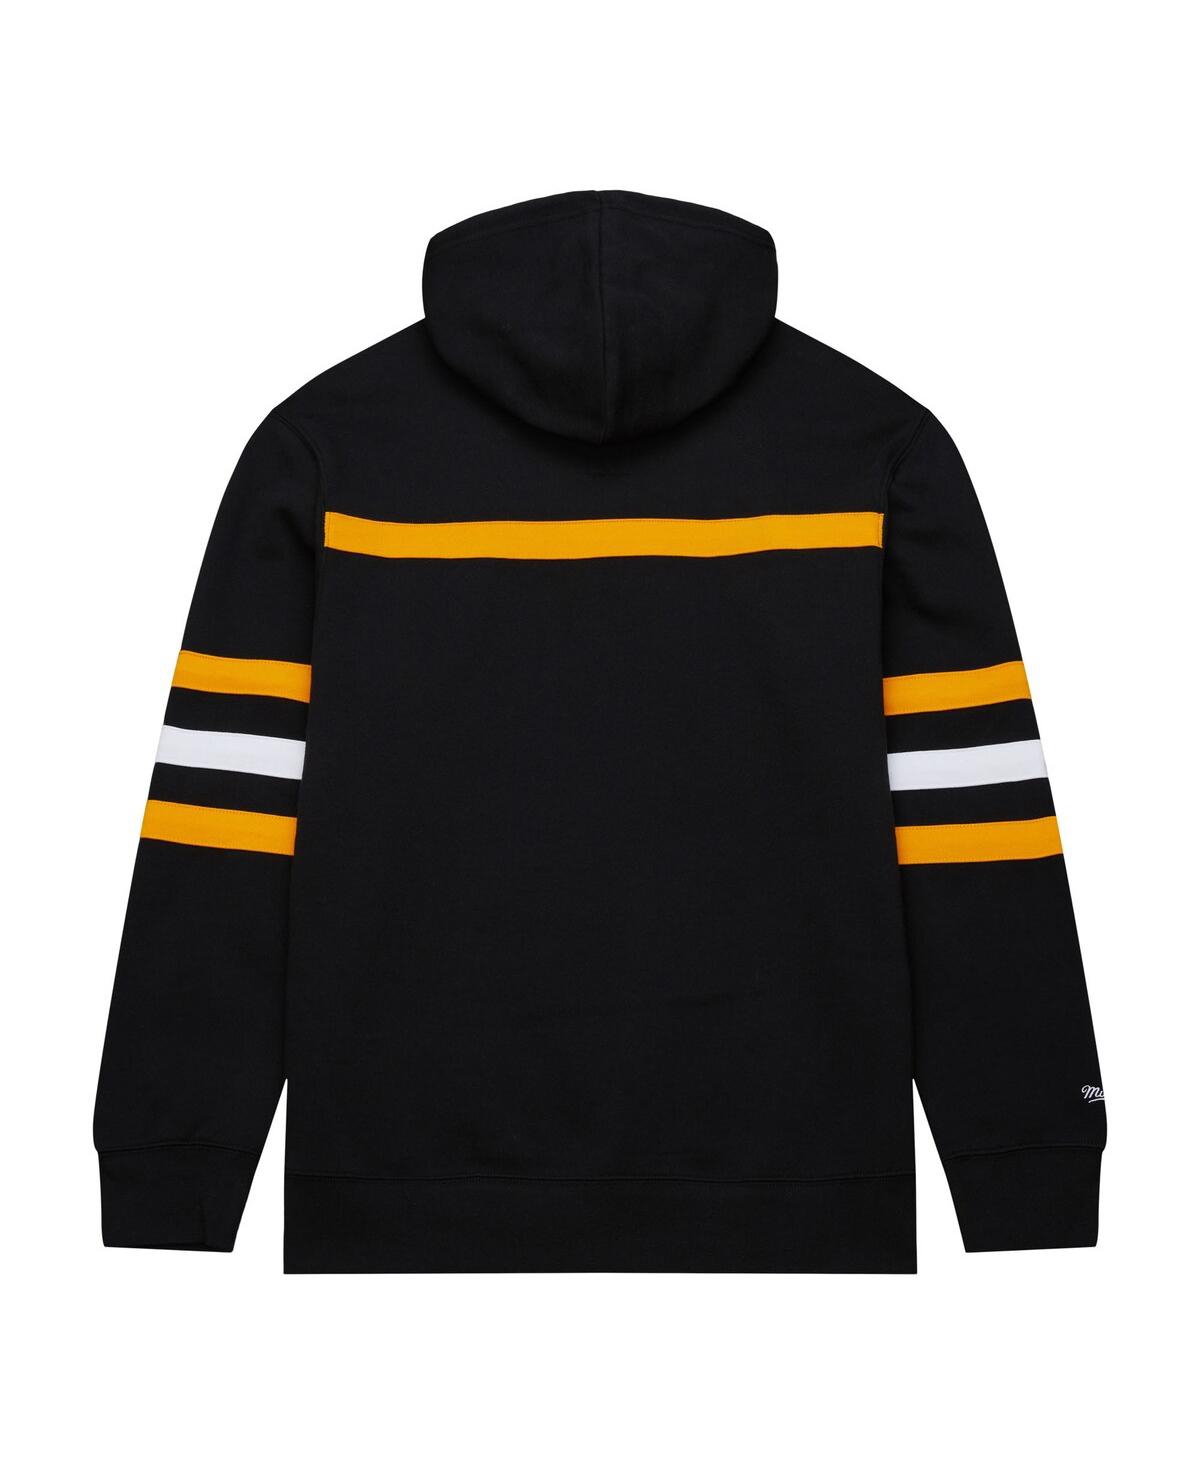 Shop Mitchell & Ness Men's  Black Pittsburgh Penguins Head Coach Pullover Hoodie